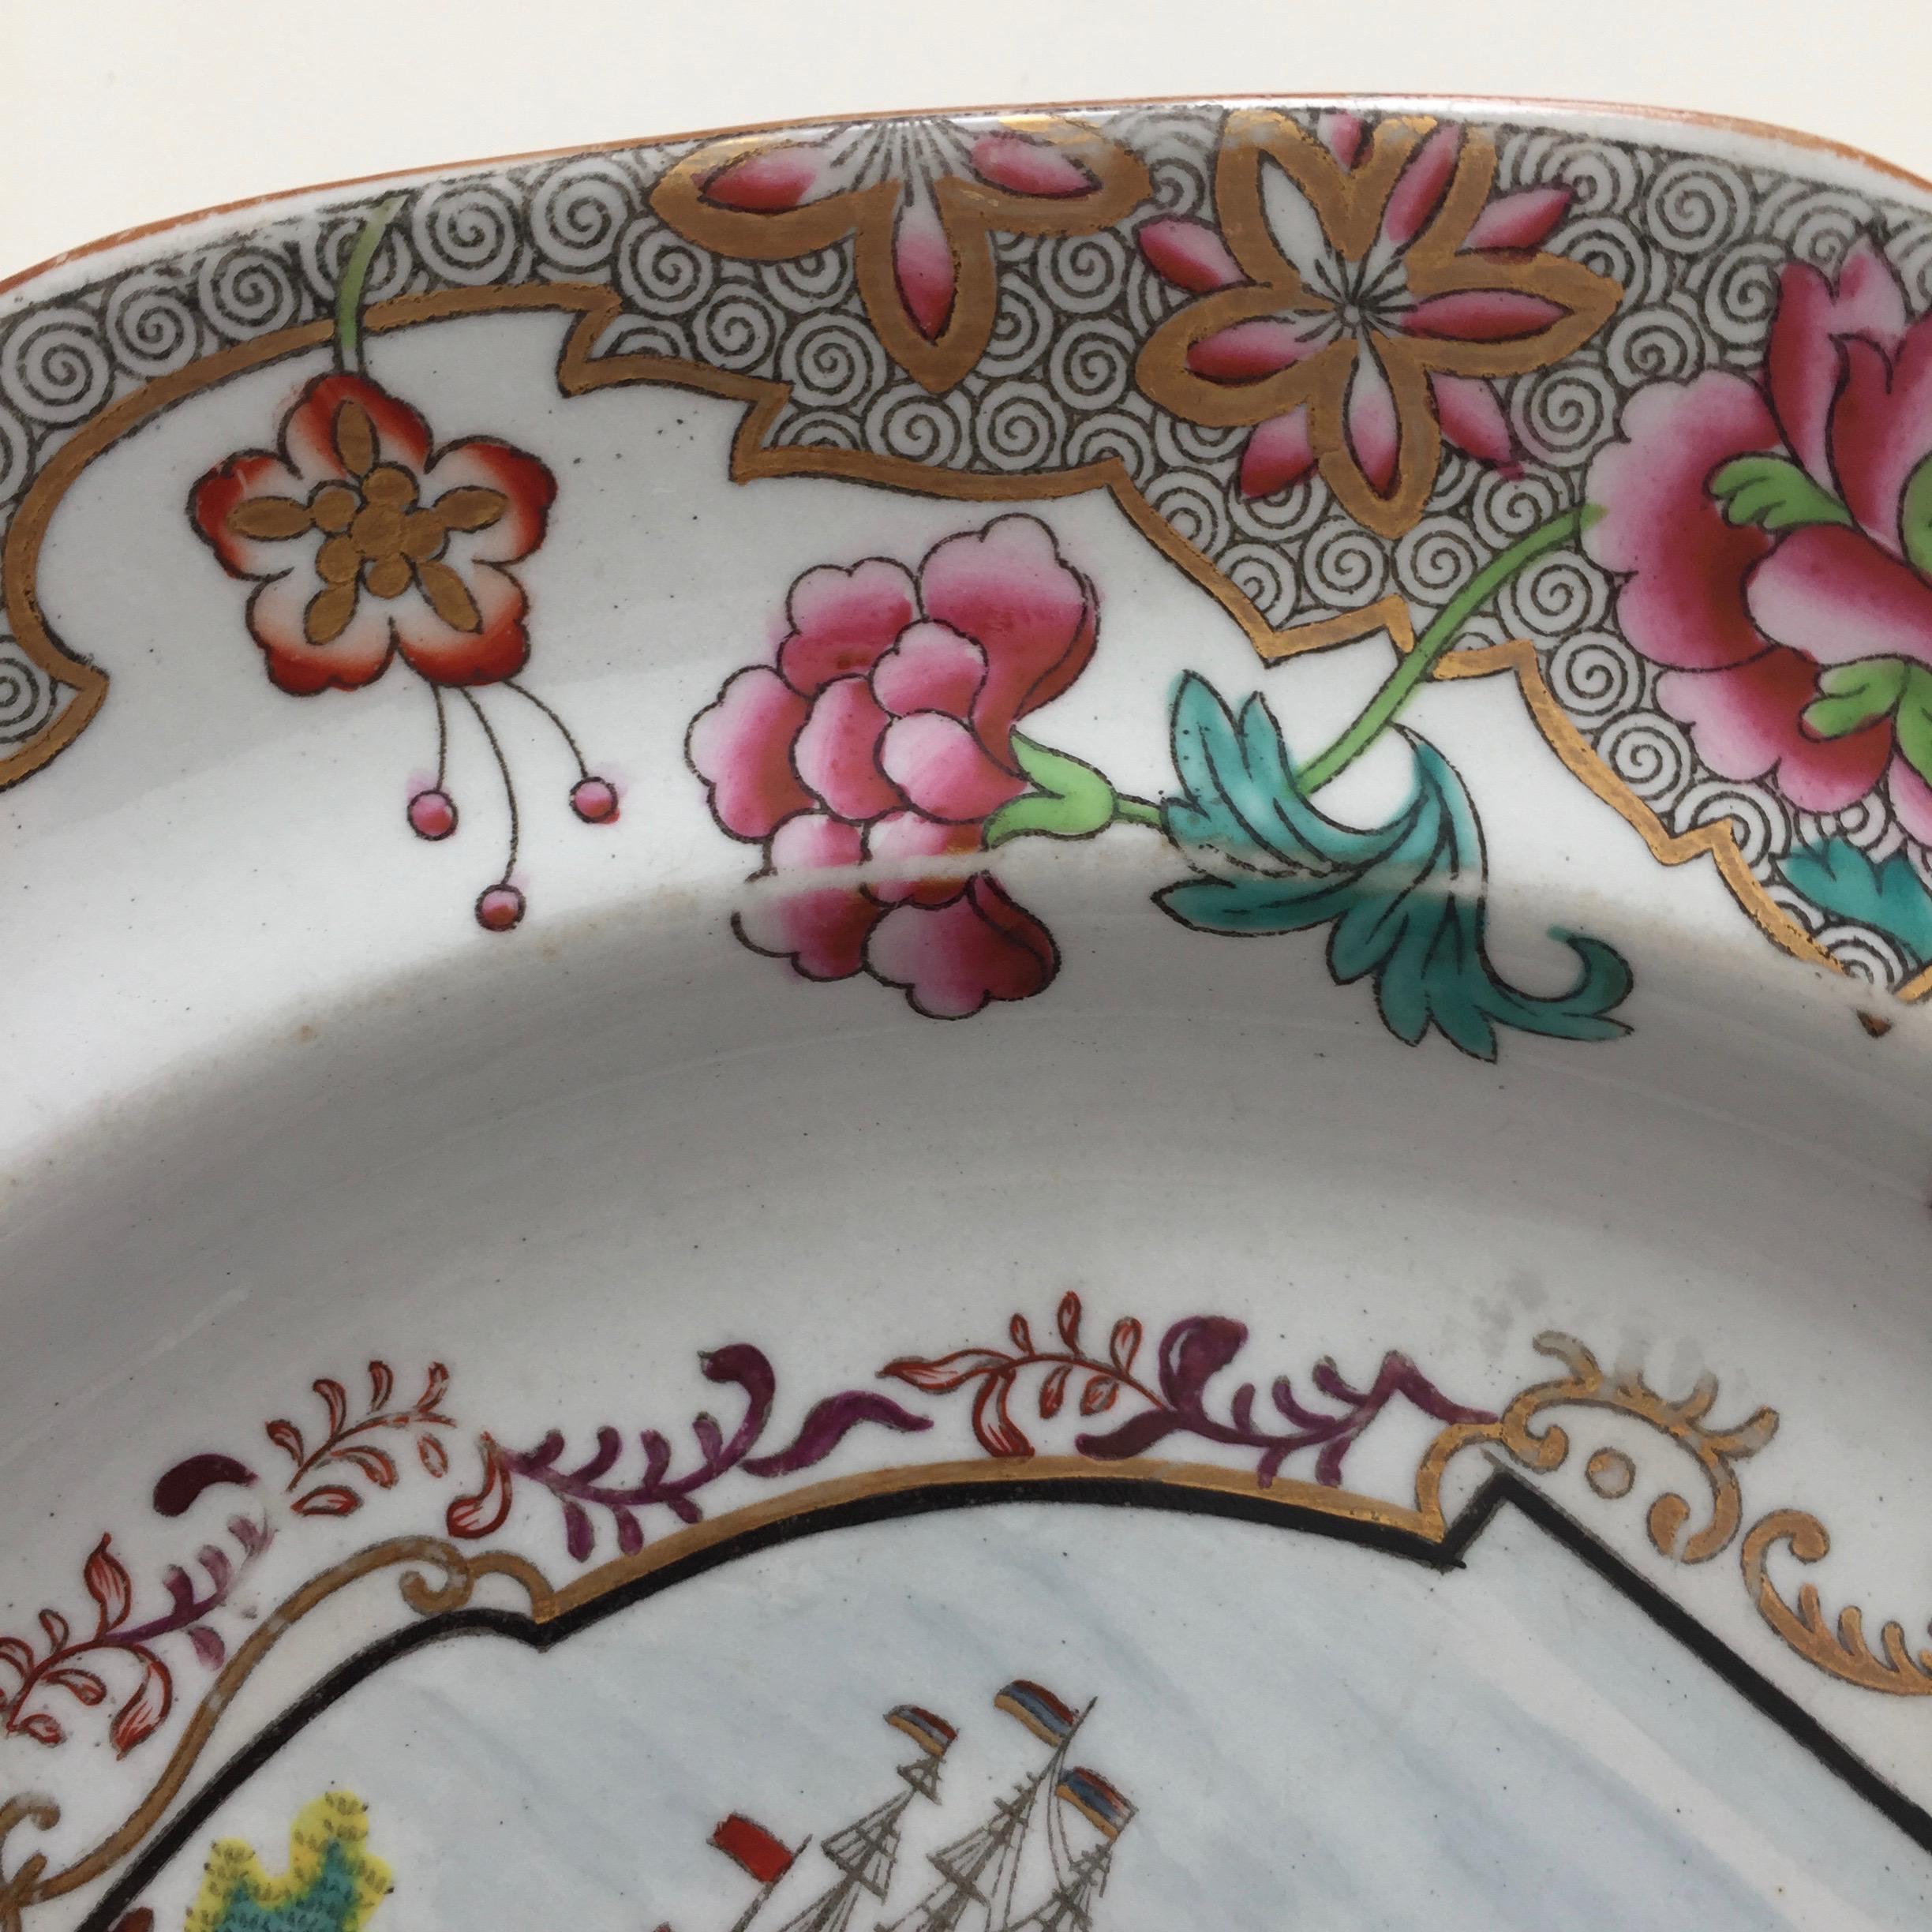 Porcelain Spode Stone China Plate with Chinoiserie Ship Pattern, Regency, 1812-1833